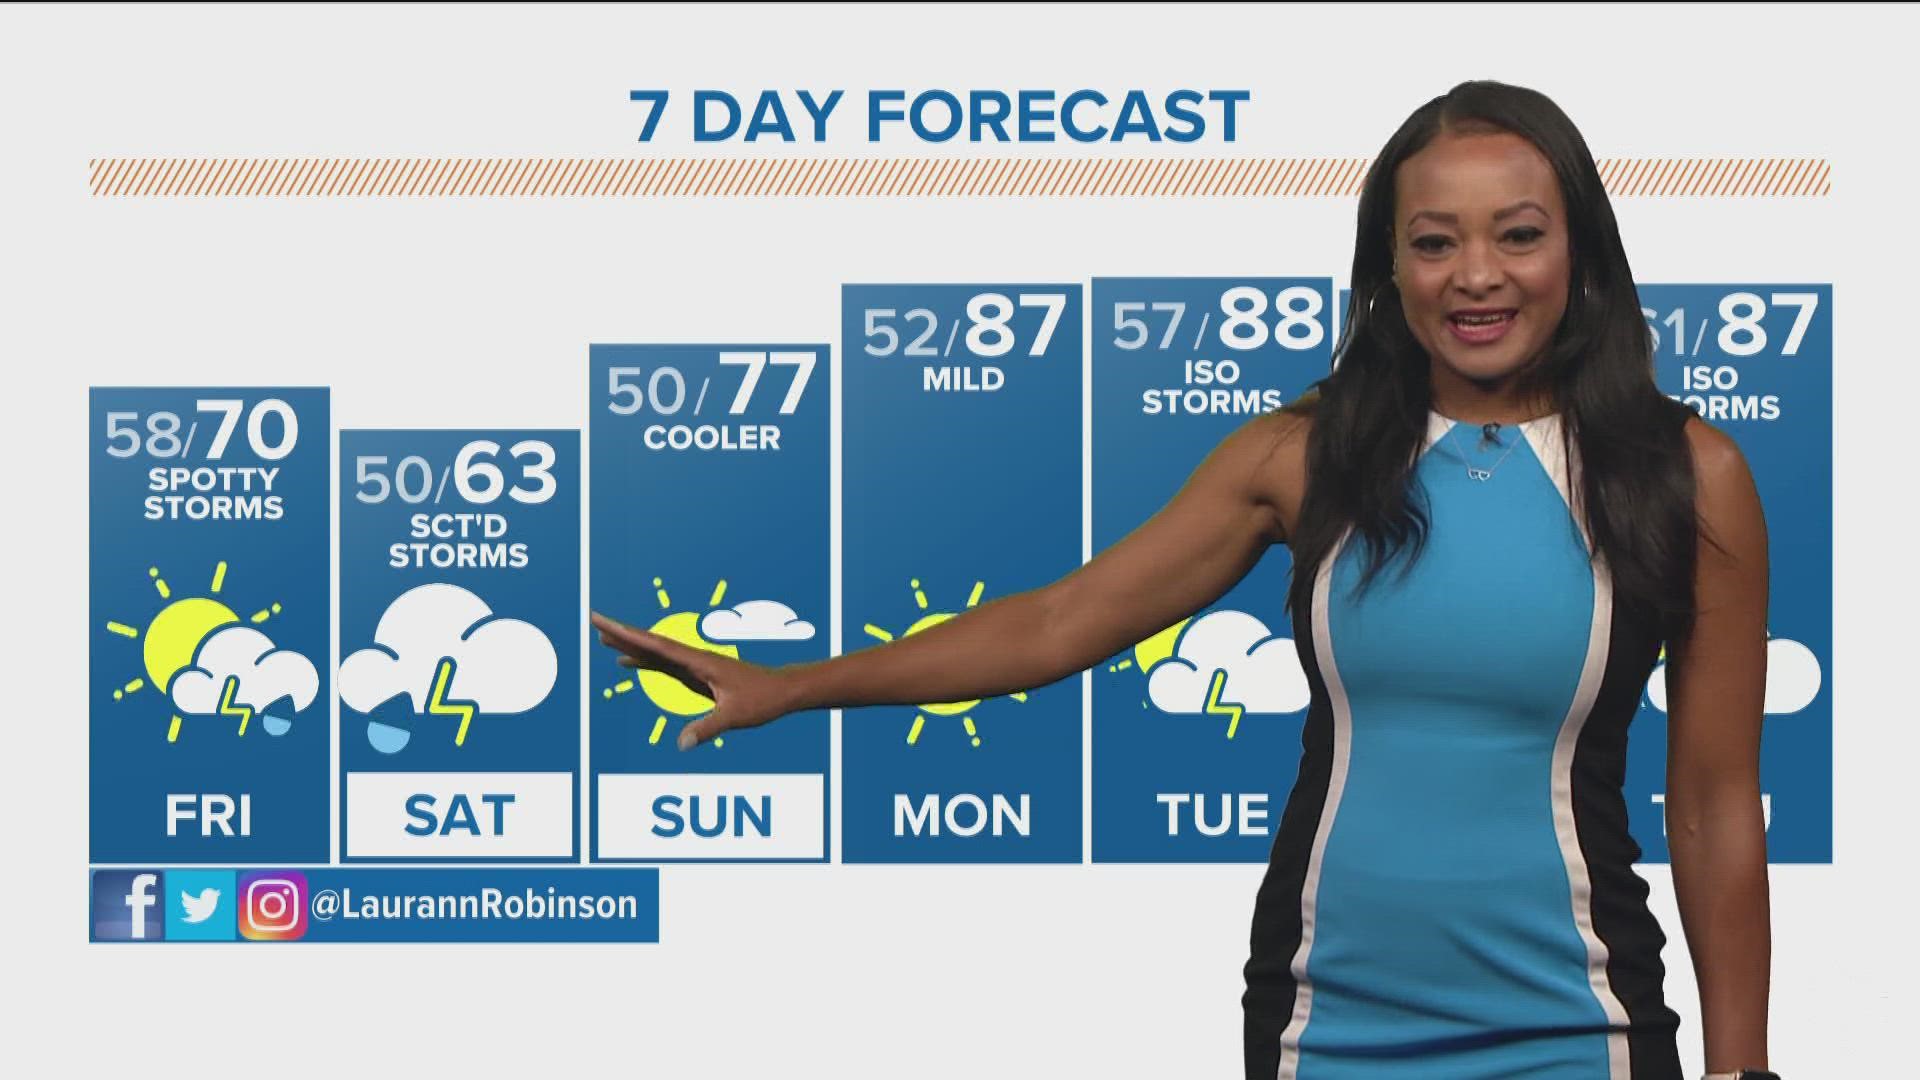 9NEWS Meteorologist Laurann Robinson has an in-depth look at the Colorado weather forecast.